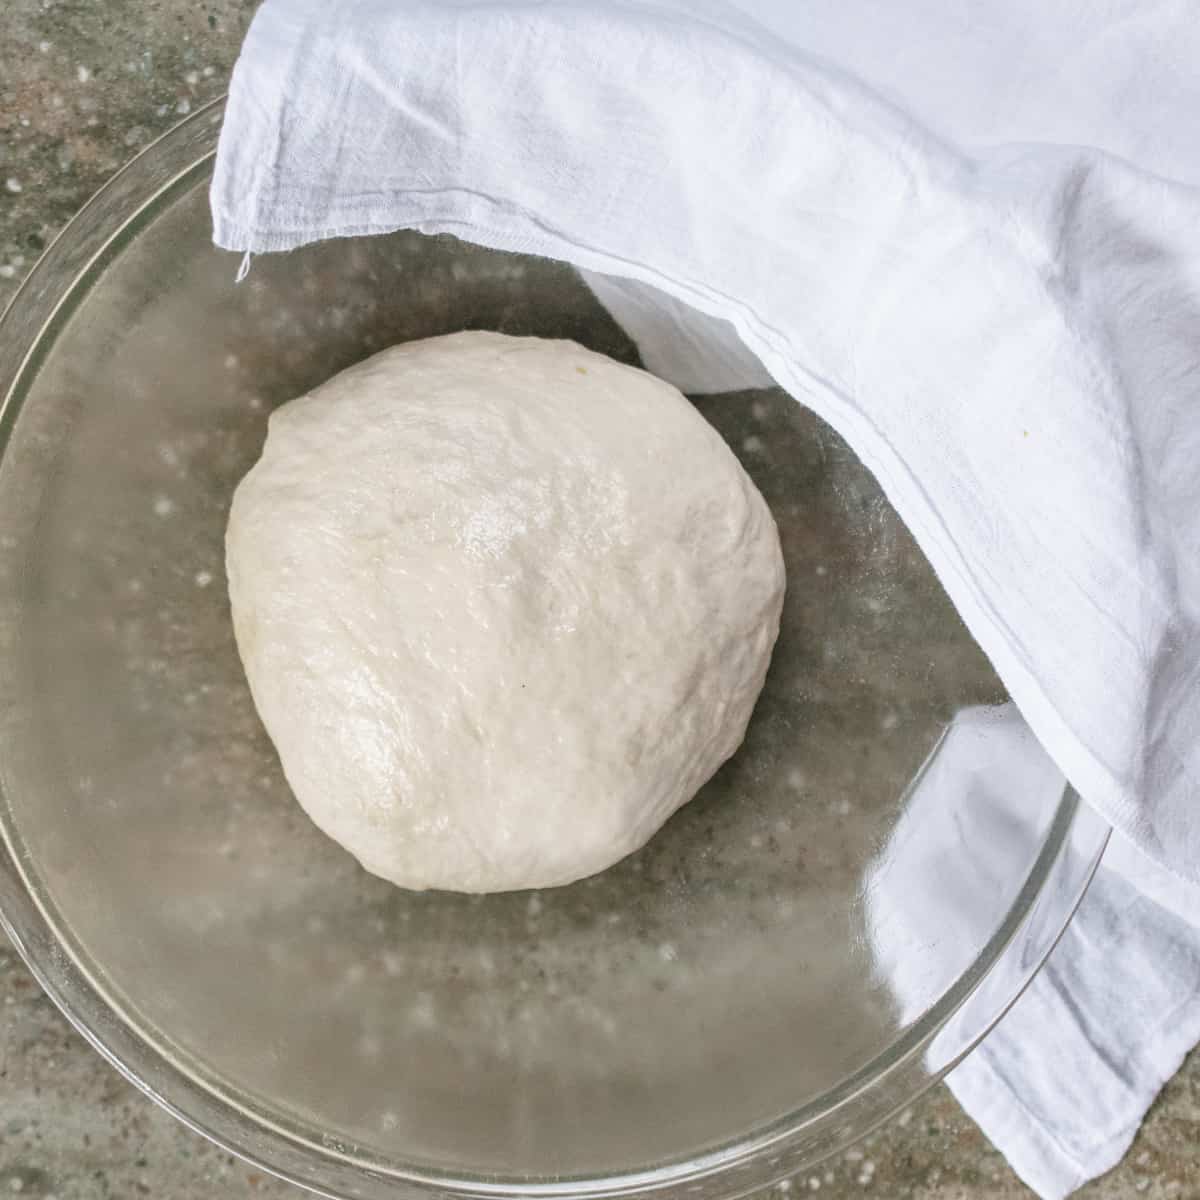 Kneaded dough in a greased bowl covered with a light towel